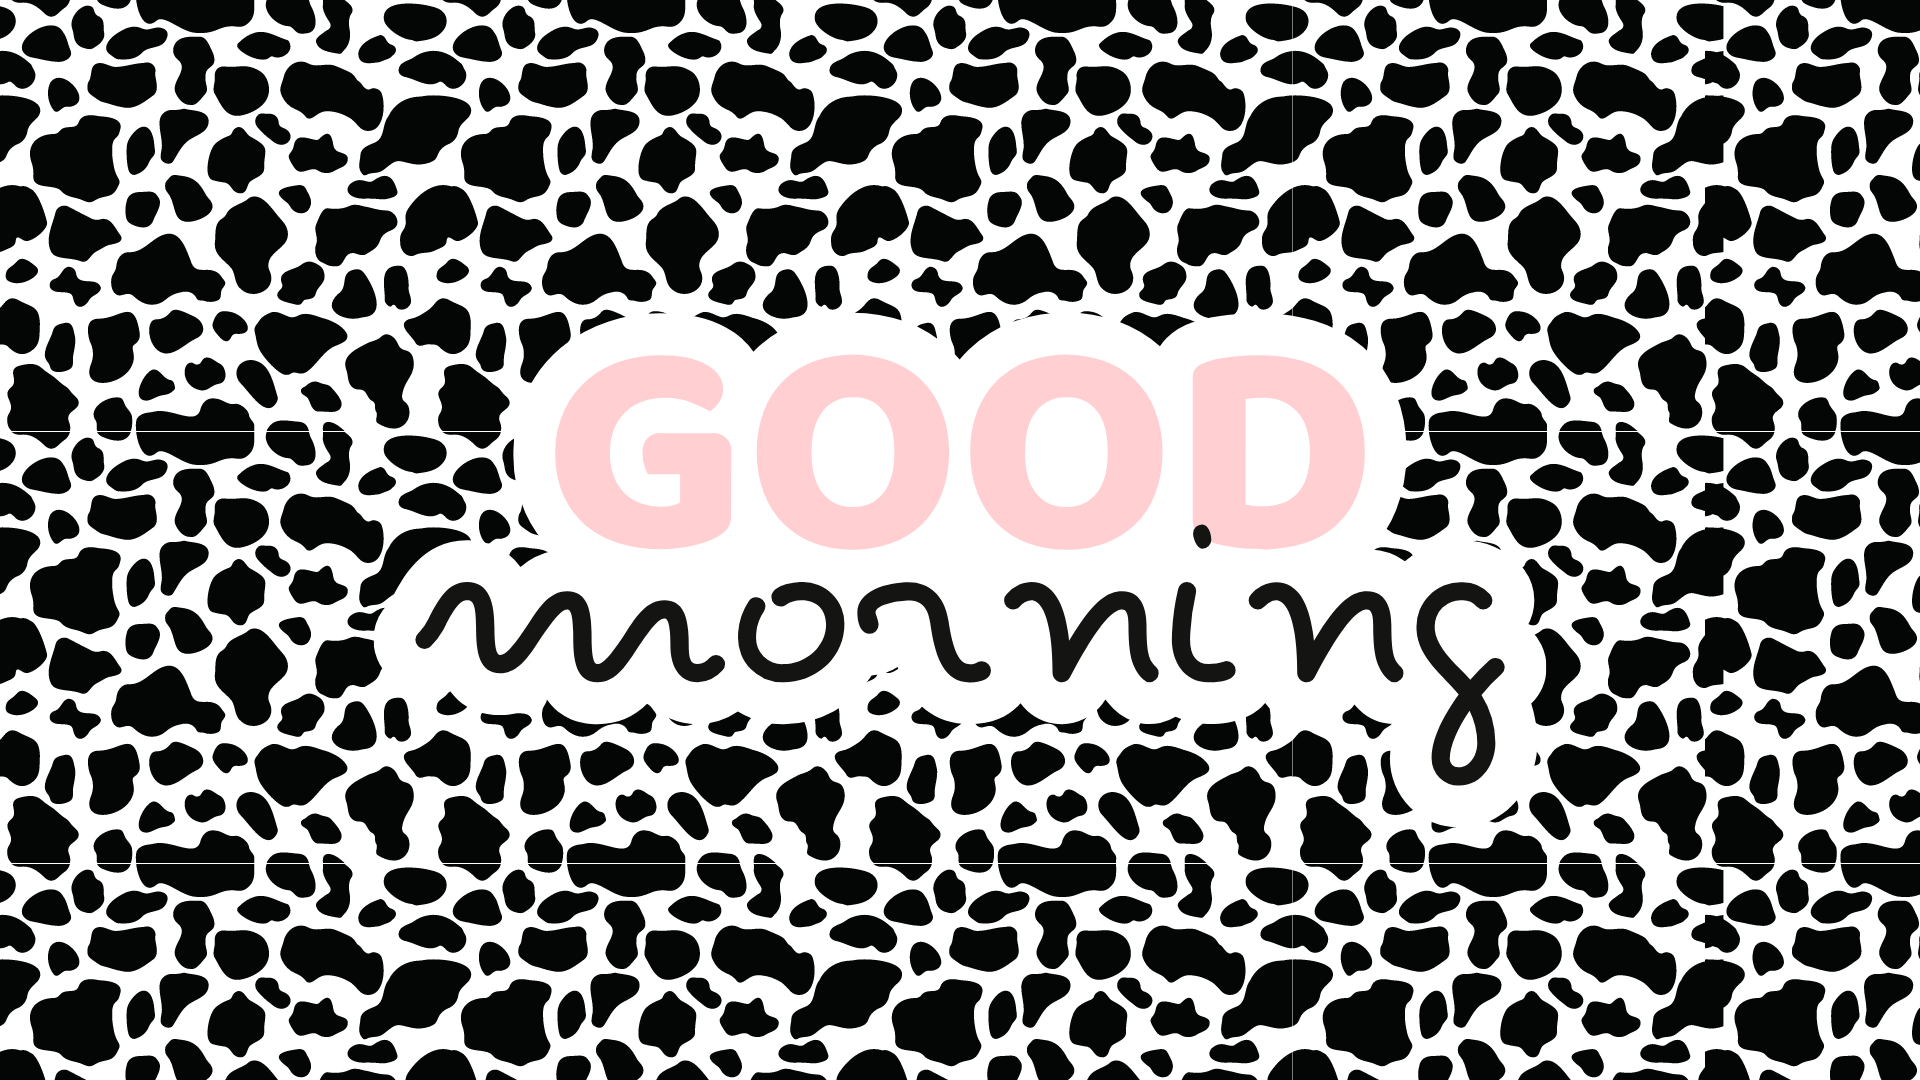 A good morning text on a cow print background - Preppy